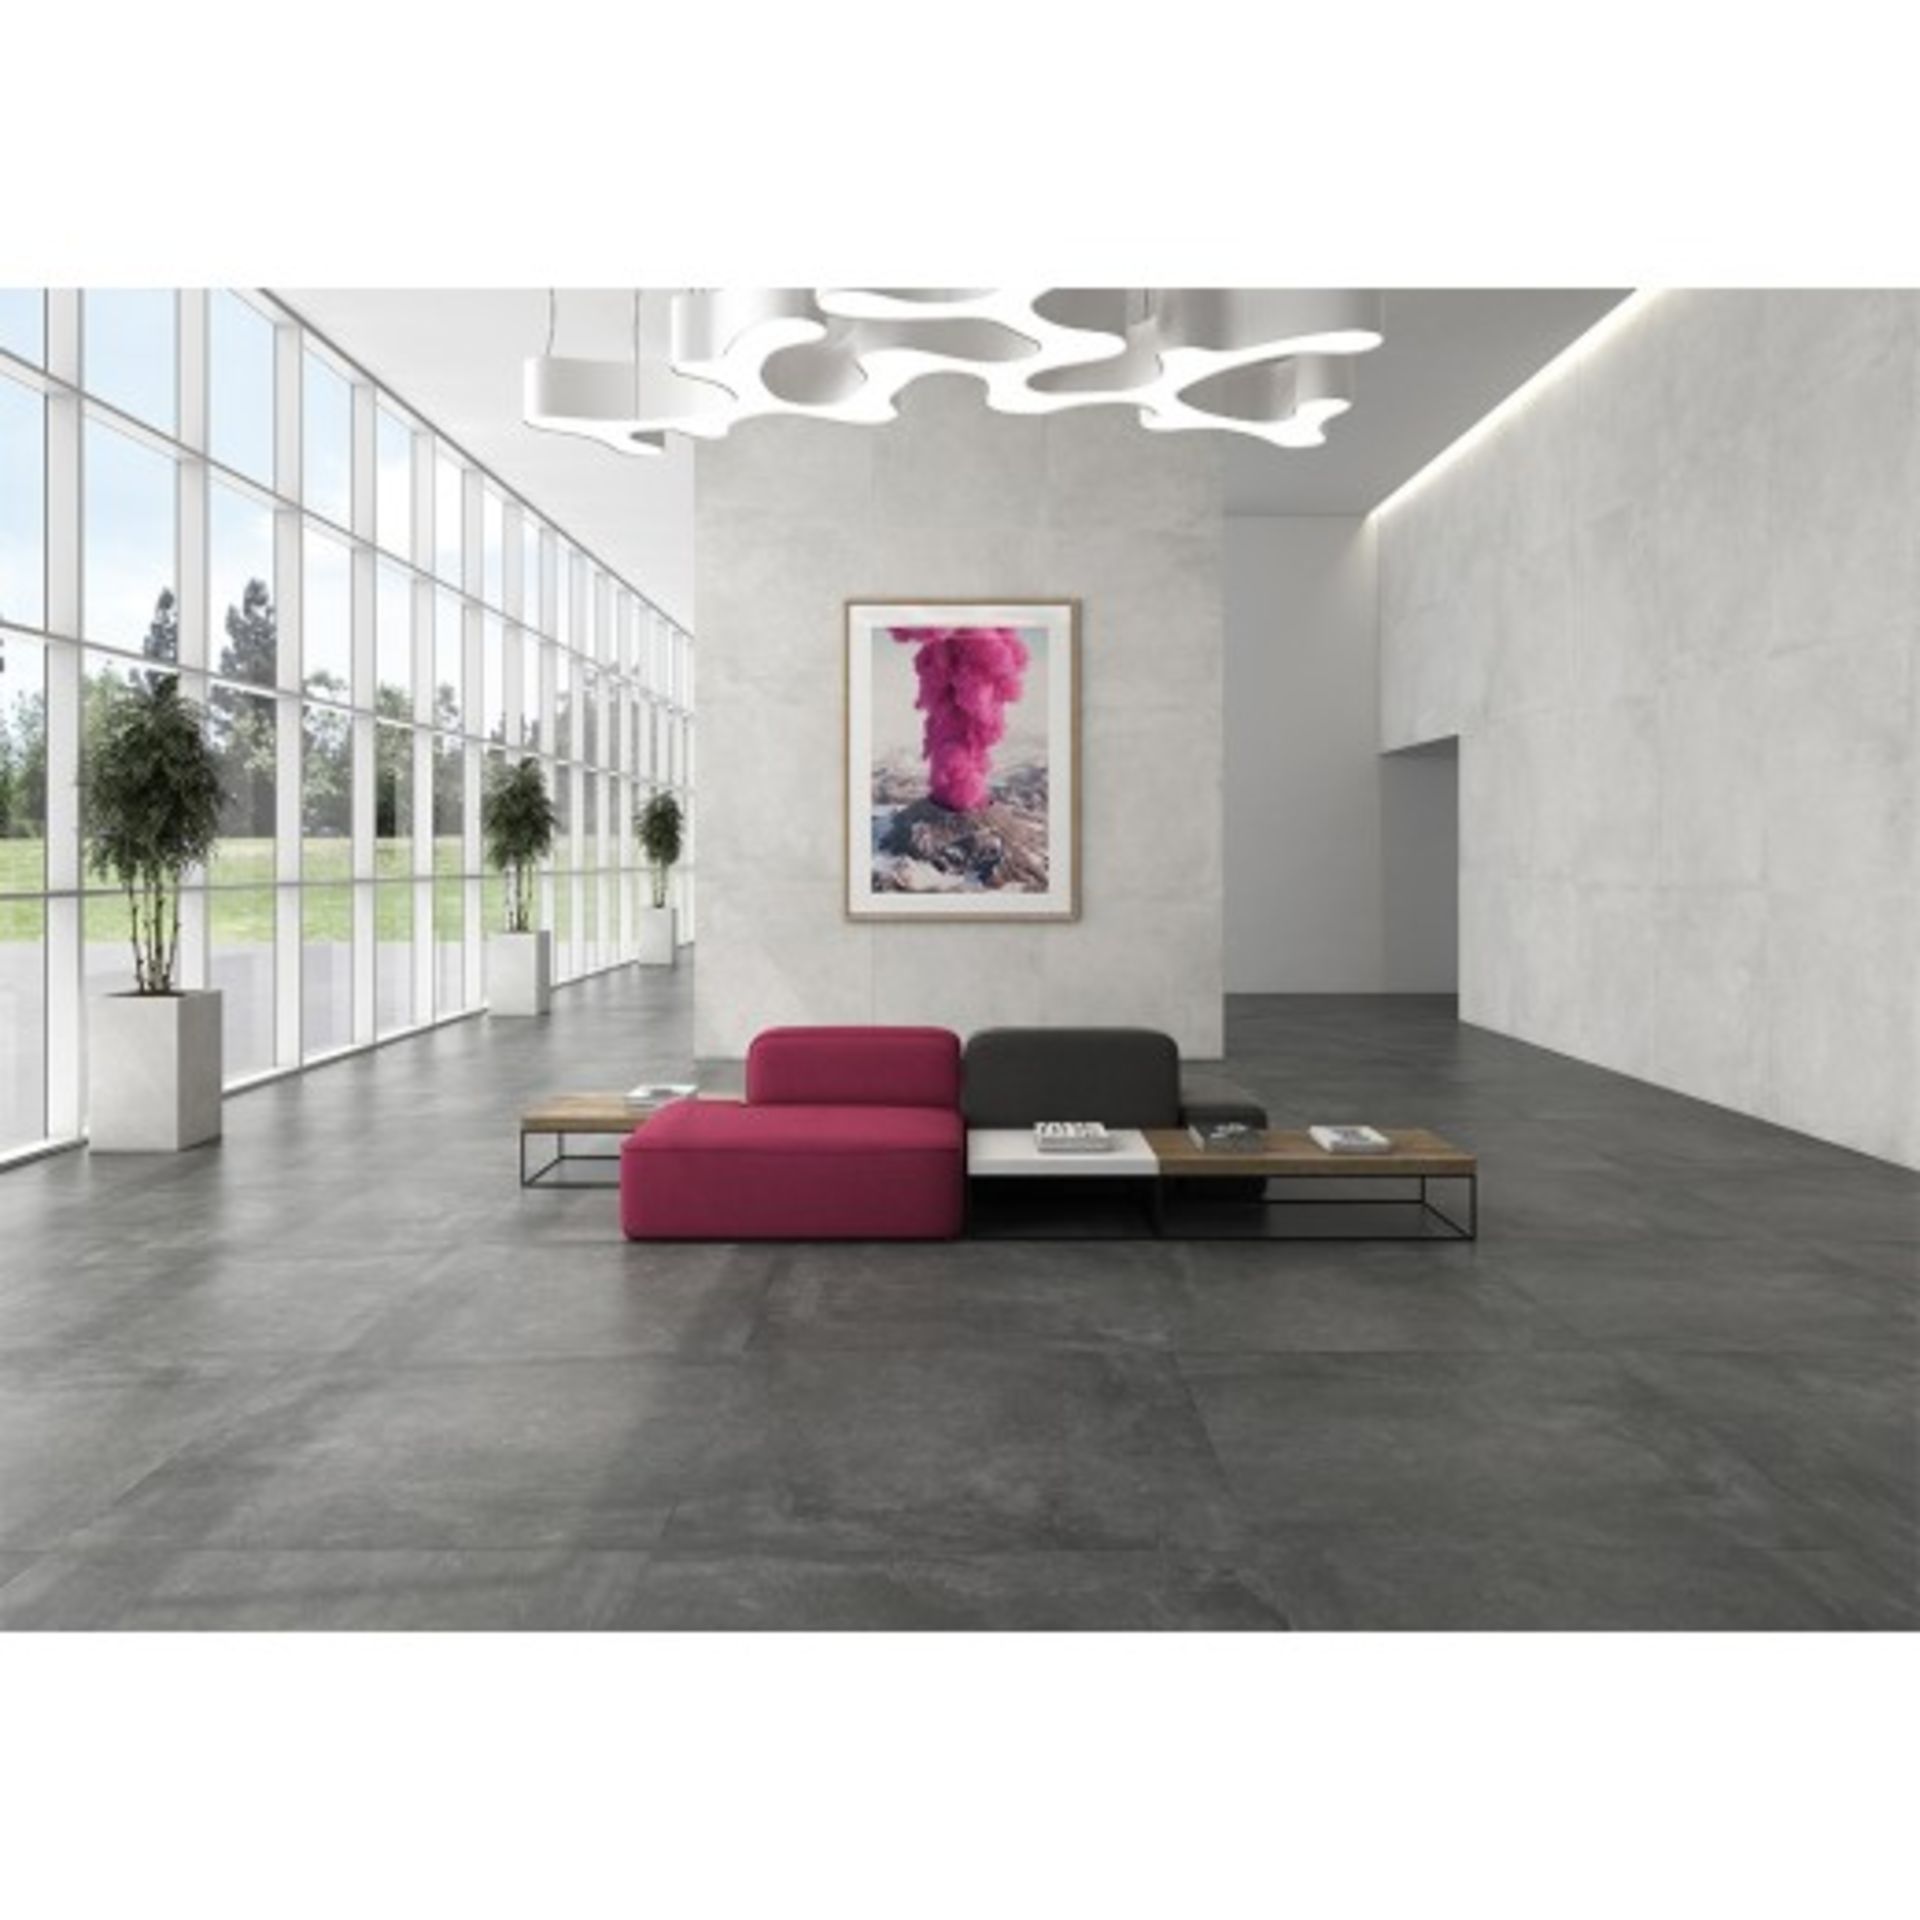 NEW 7.2 Square Meters of Nantes Marengo Wall and Floor Tiles. 450x450mm per tile, 8mm thi...